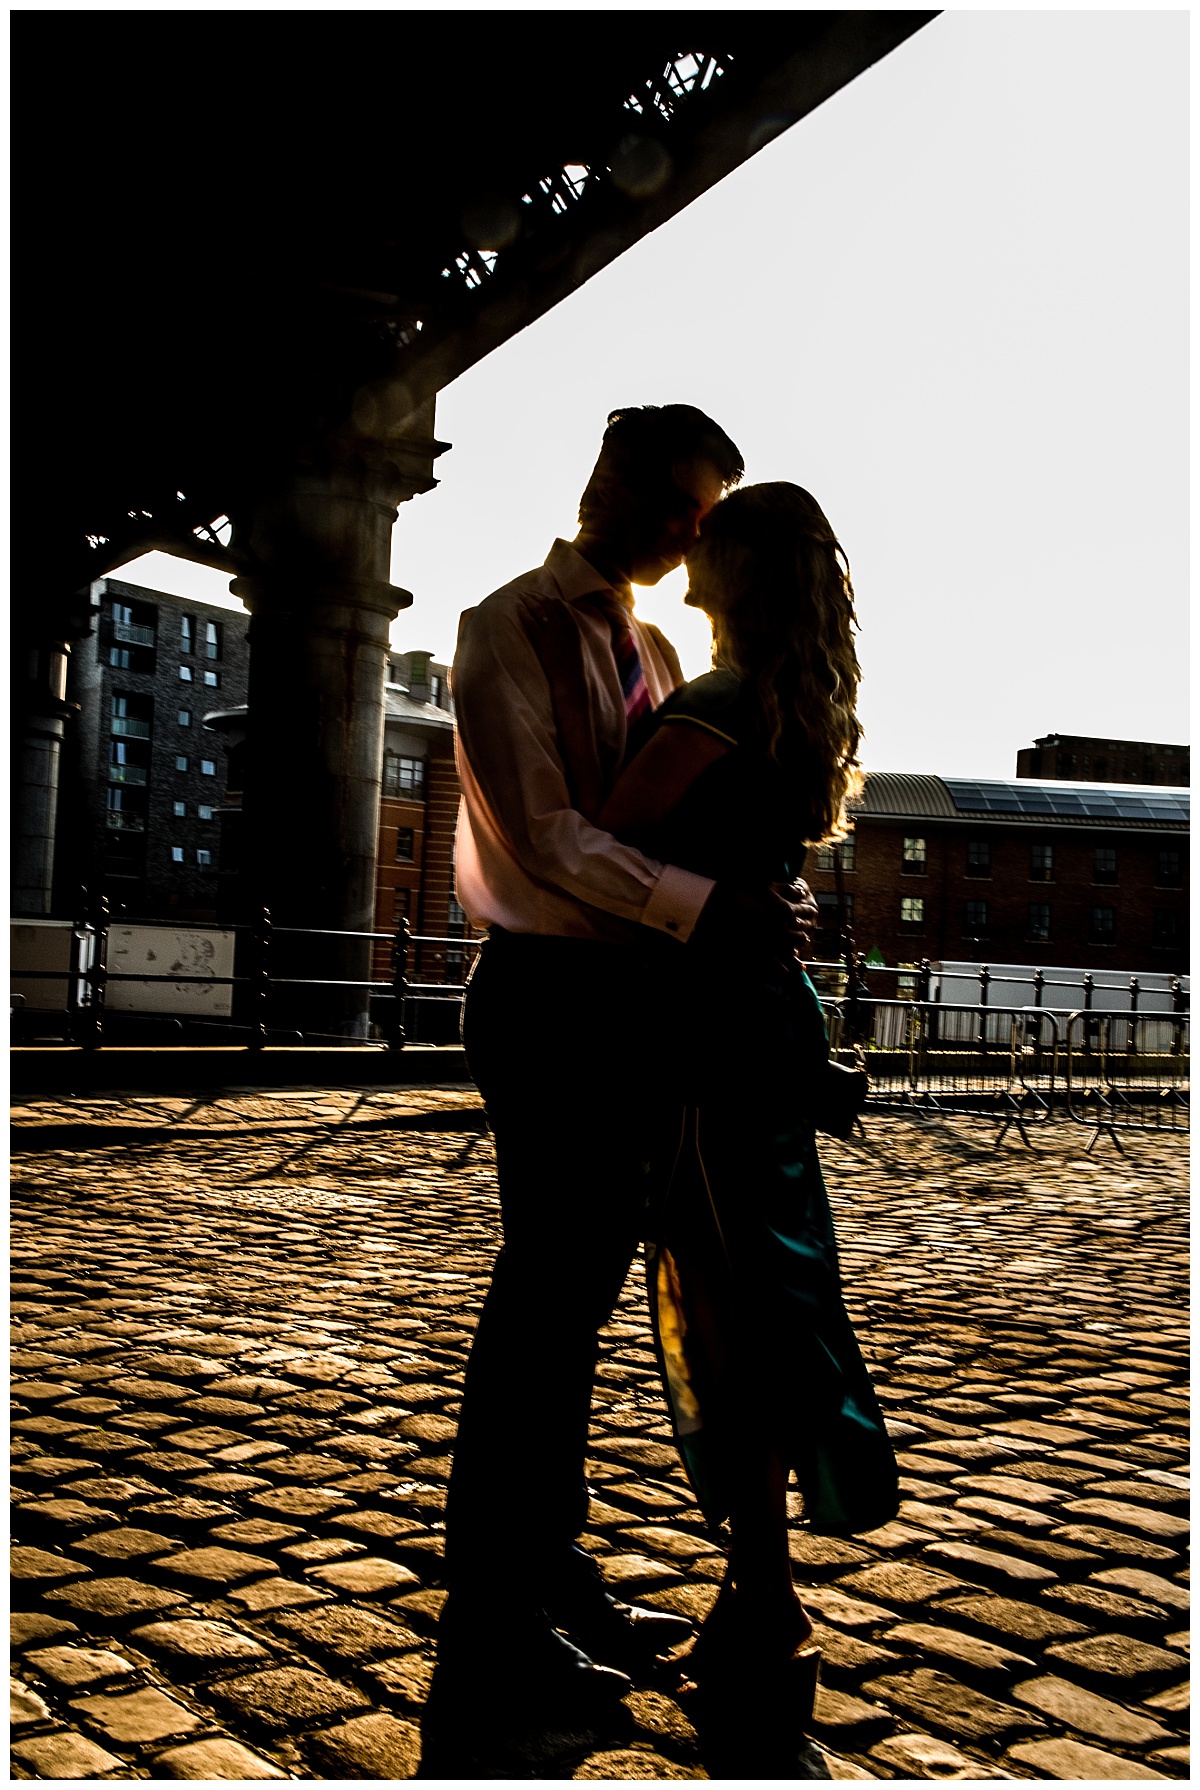 Wedding Photography Manchester - Stephanie and James's Pre wedding Shoot in Castlefield 2